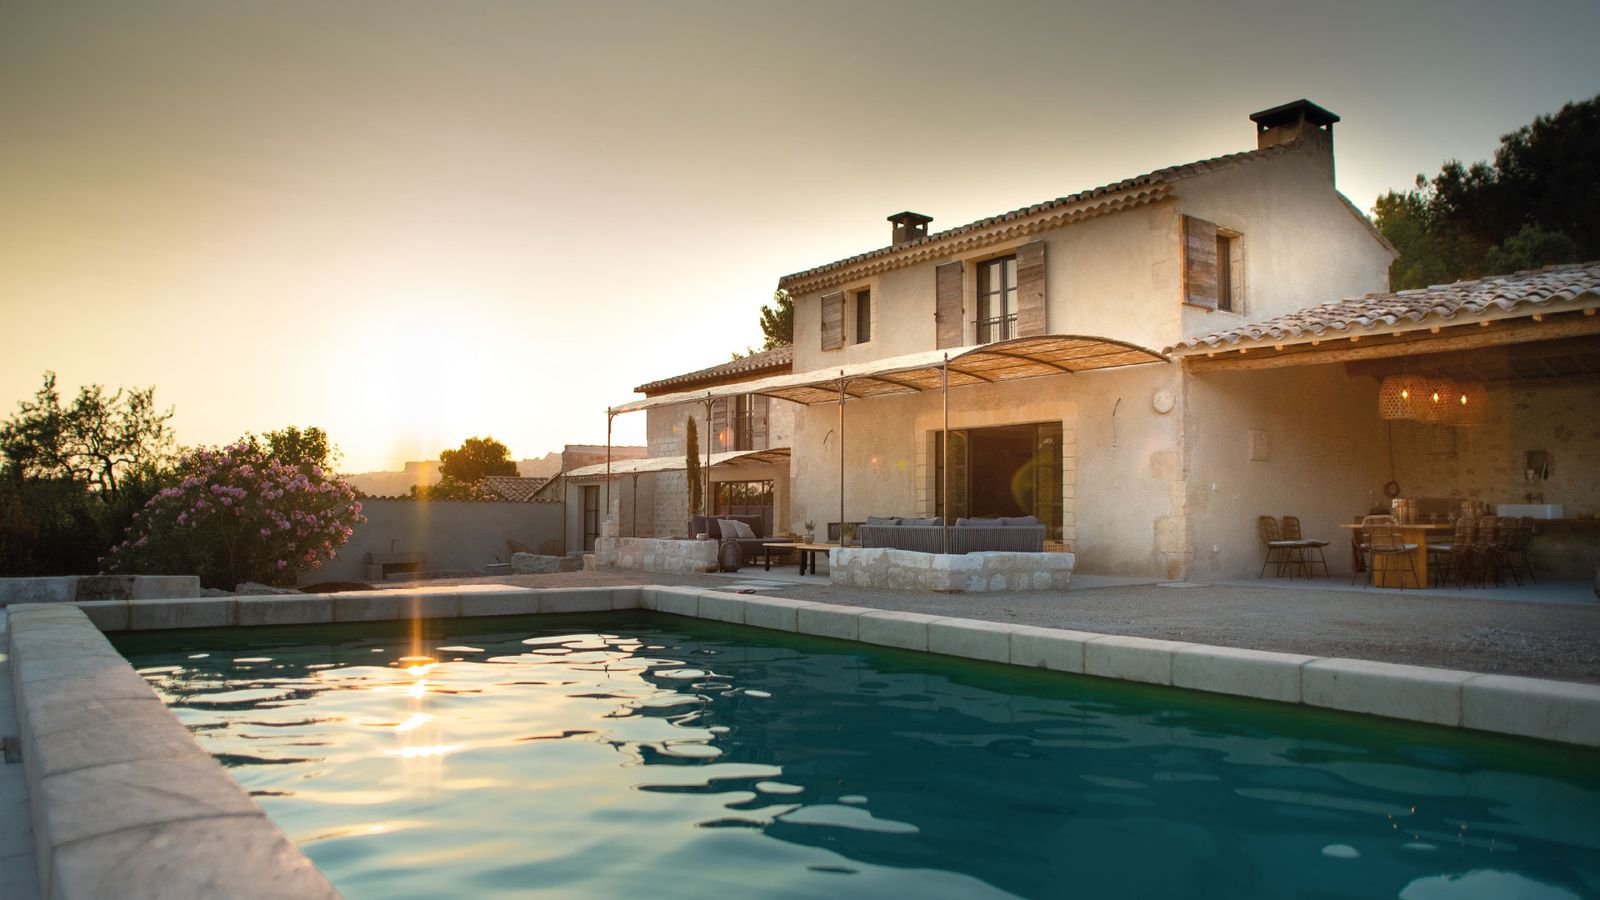 Luxury Villa for rent in France Provence vacations